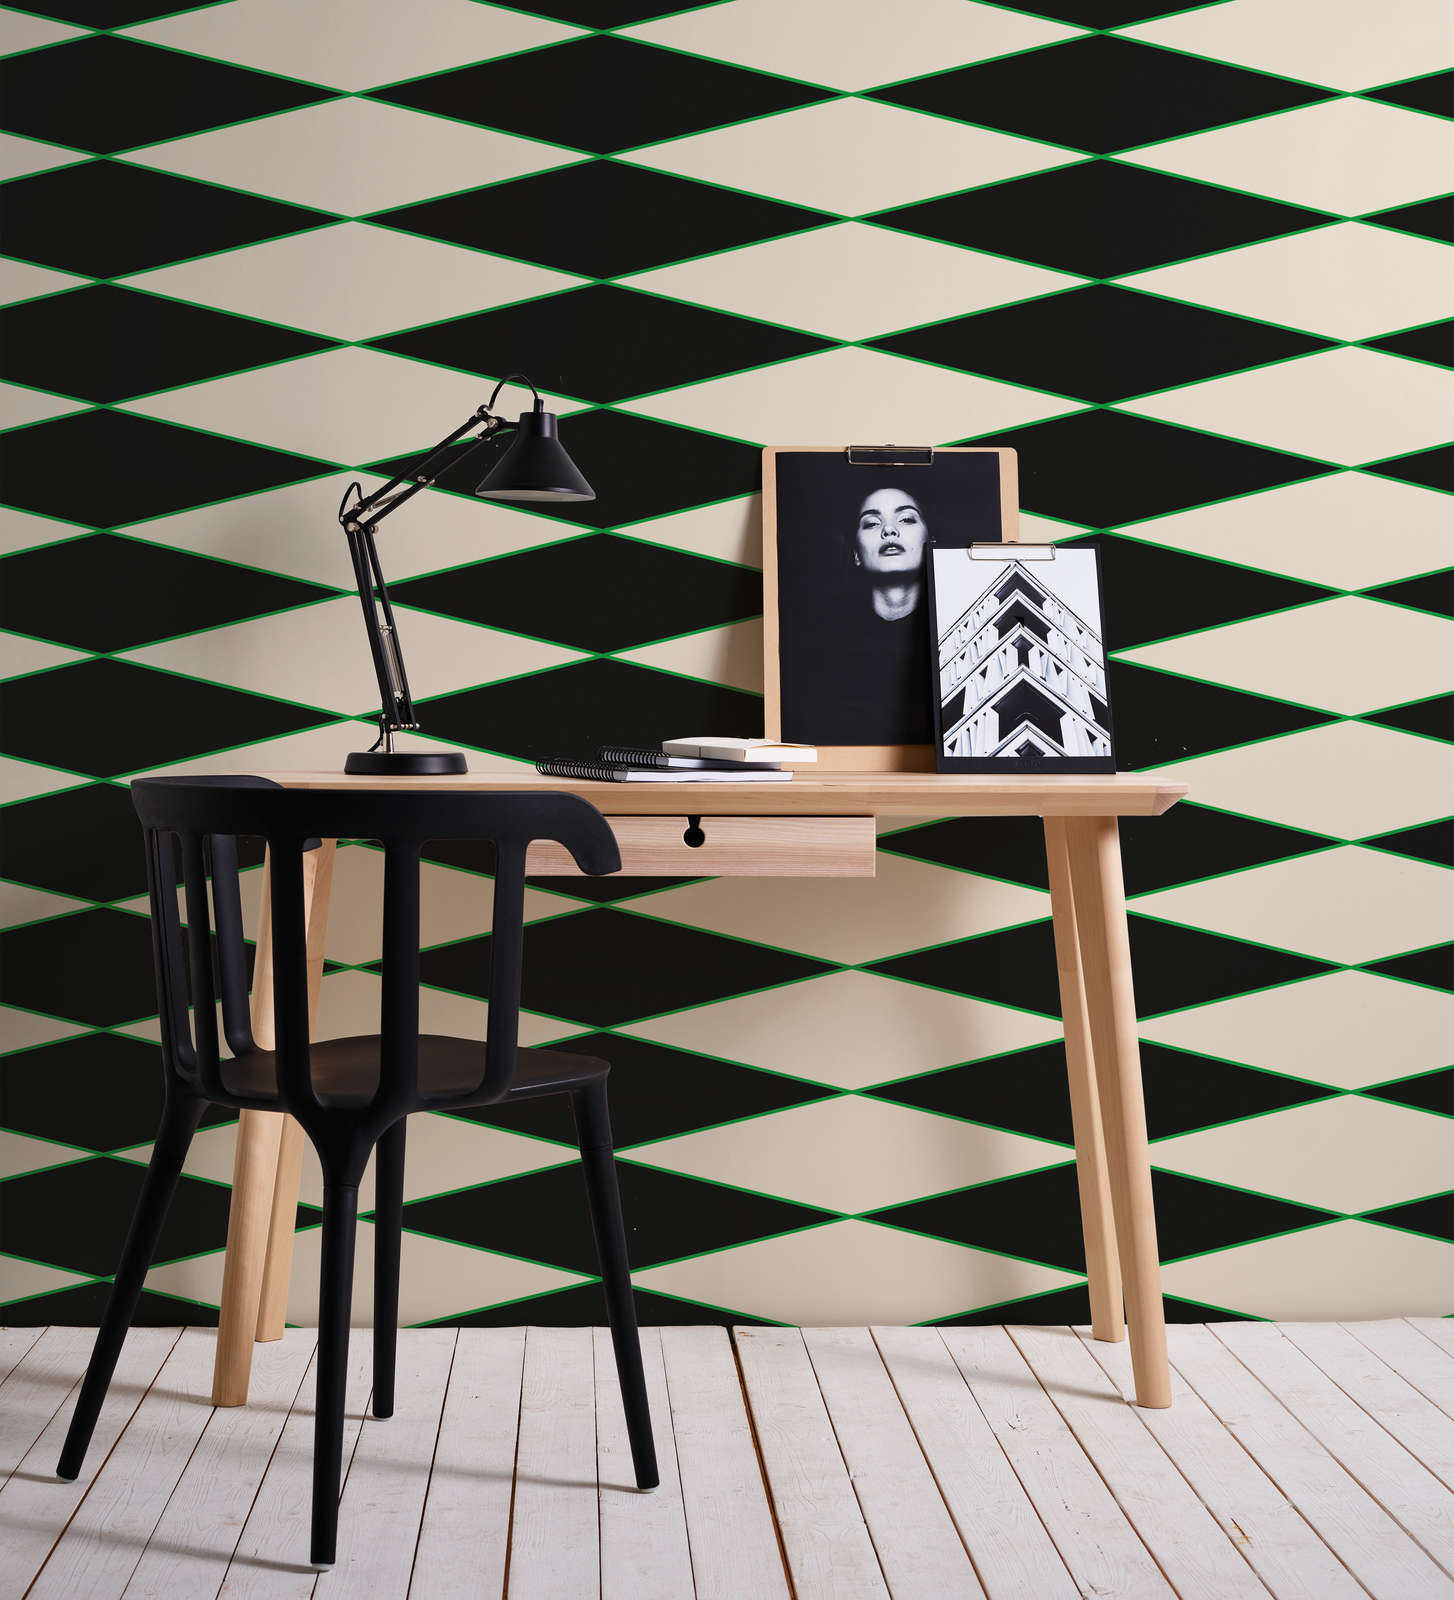             Graphic Wallpaper with Diamonds & Line Patterns - Black, Cream, Green | Pearl Smooth Non-woven
        